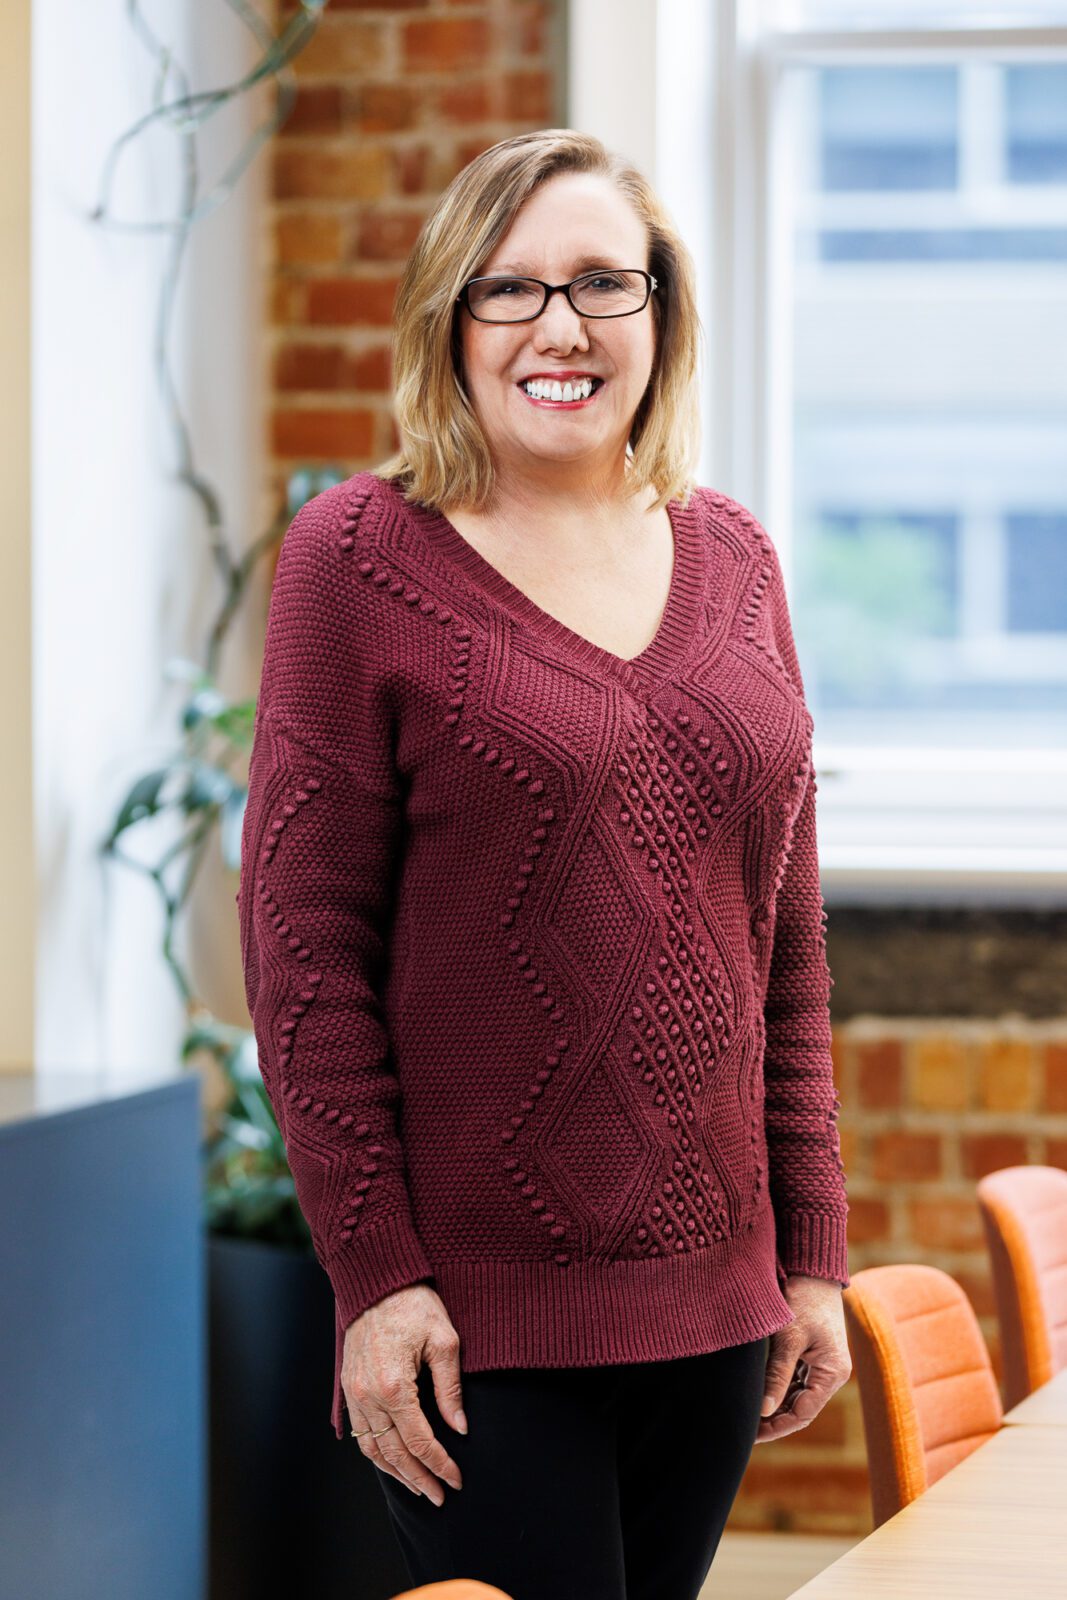 Woman with plum coloured knitted top and glasses smiles at camera